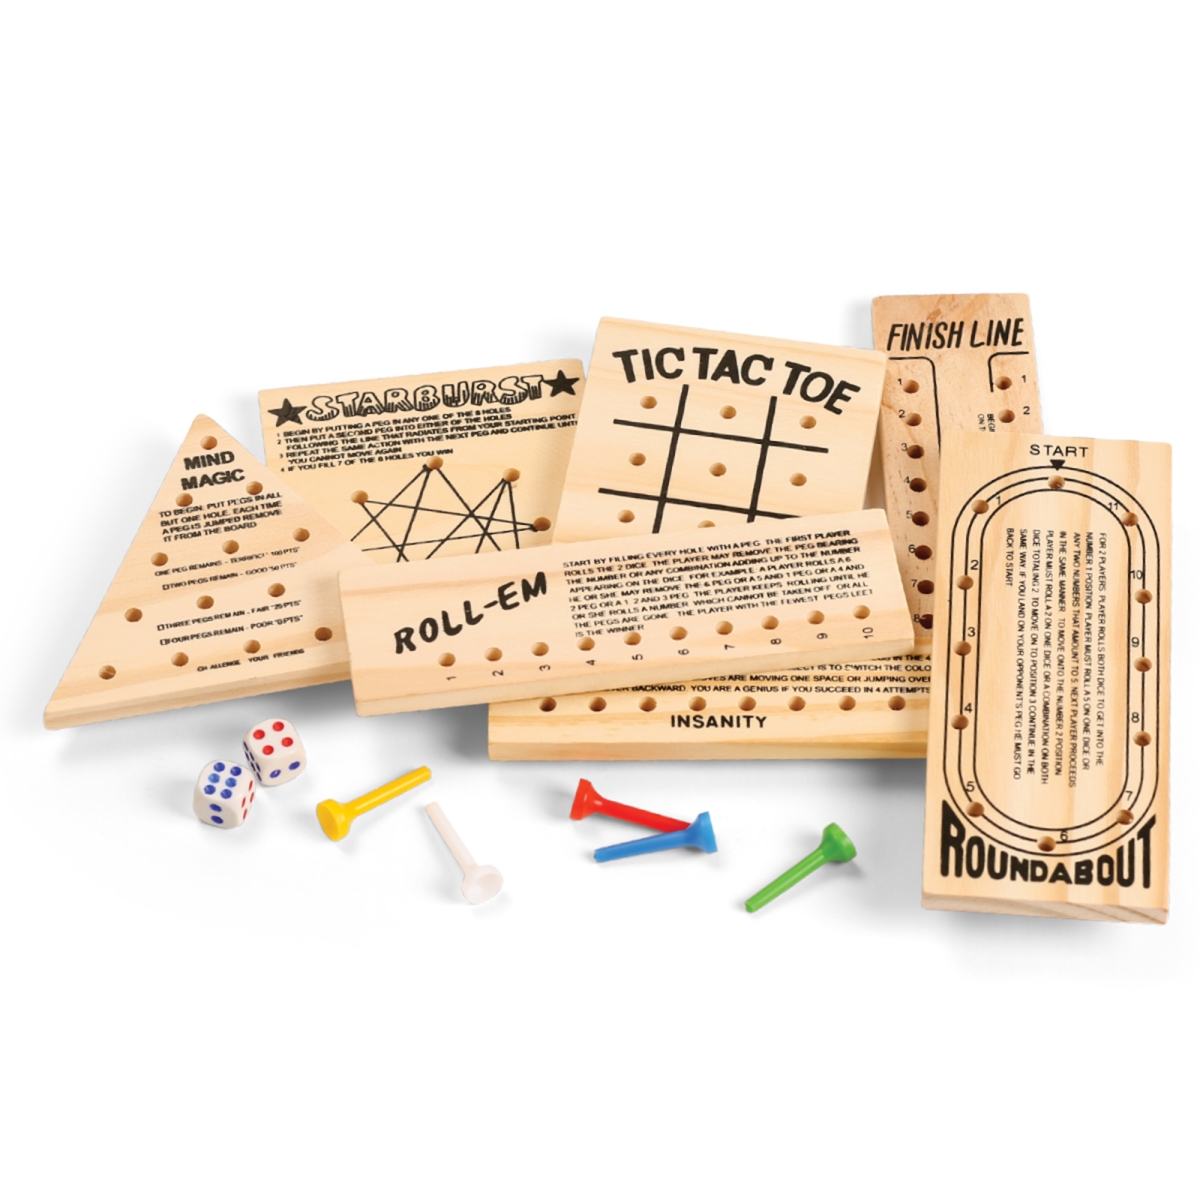 Picture of Zummy FS1168 7 Pack Mini Wood Games with Dice and Pegs&#44; Tic Tac Toe&#44; Mind Magic&#44; Starburst&#44; Finish Line&#44; Insanity&#44; Roll-Em&#44; Roundabout